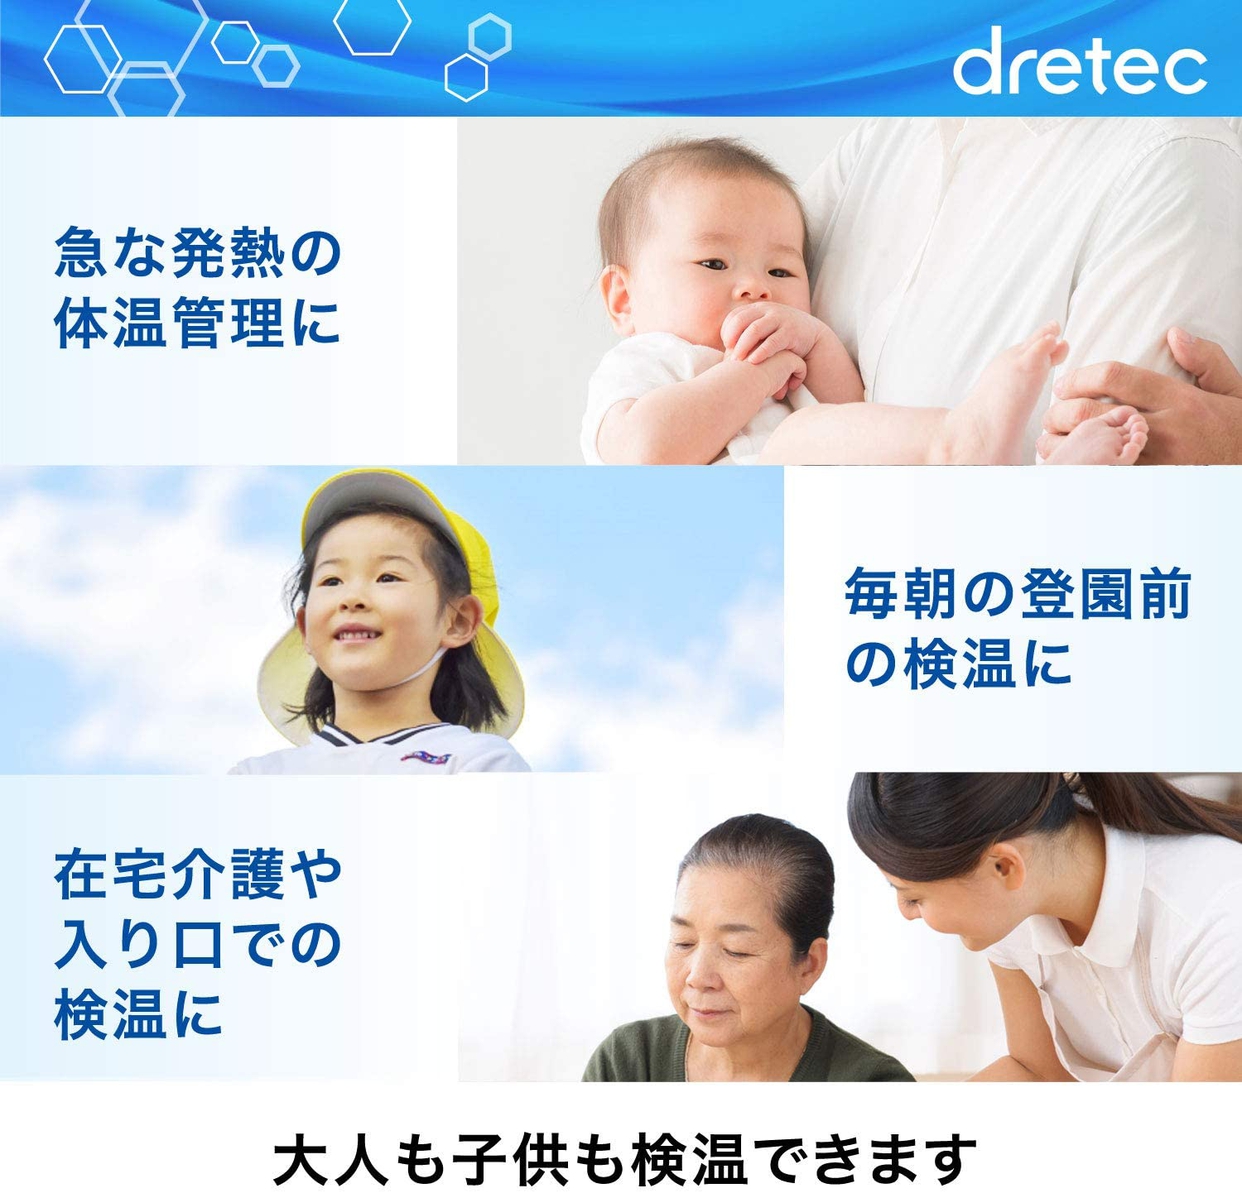 dretec(ドリテック) 非接触スキャン体温計 TO-402の商品画像サムネ3 